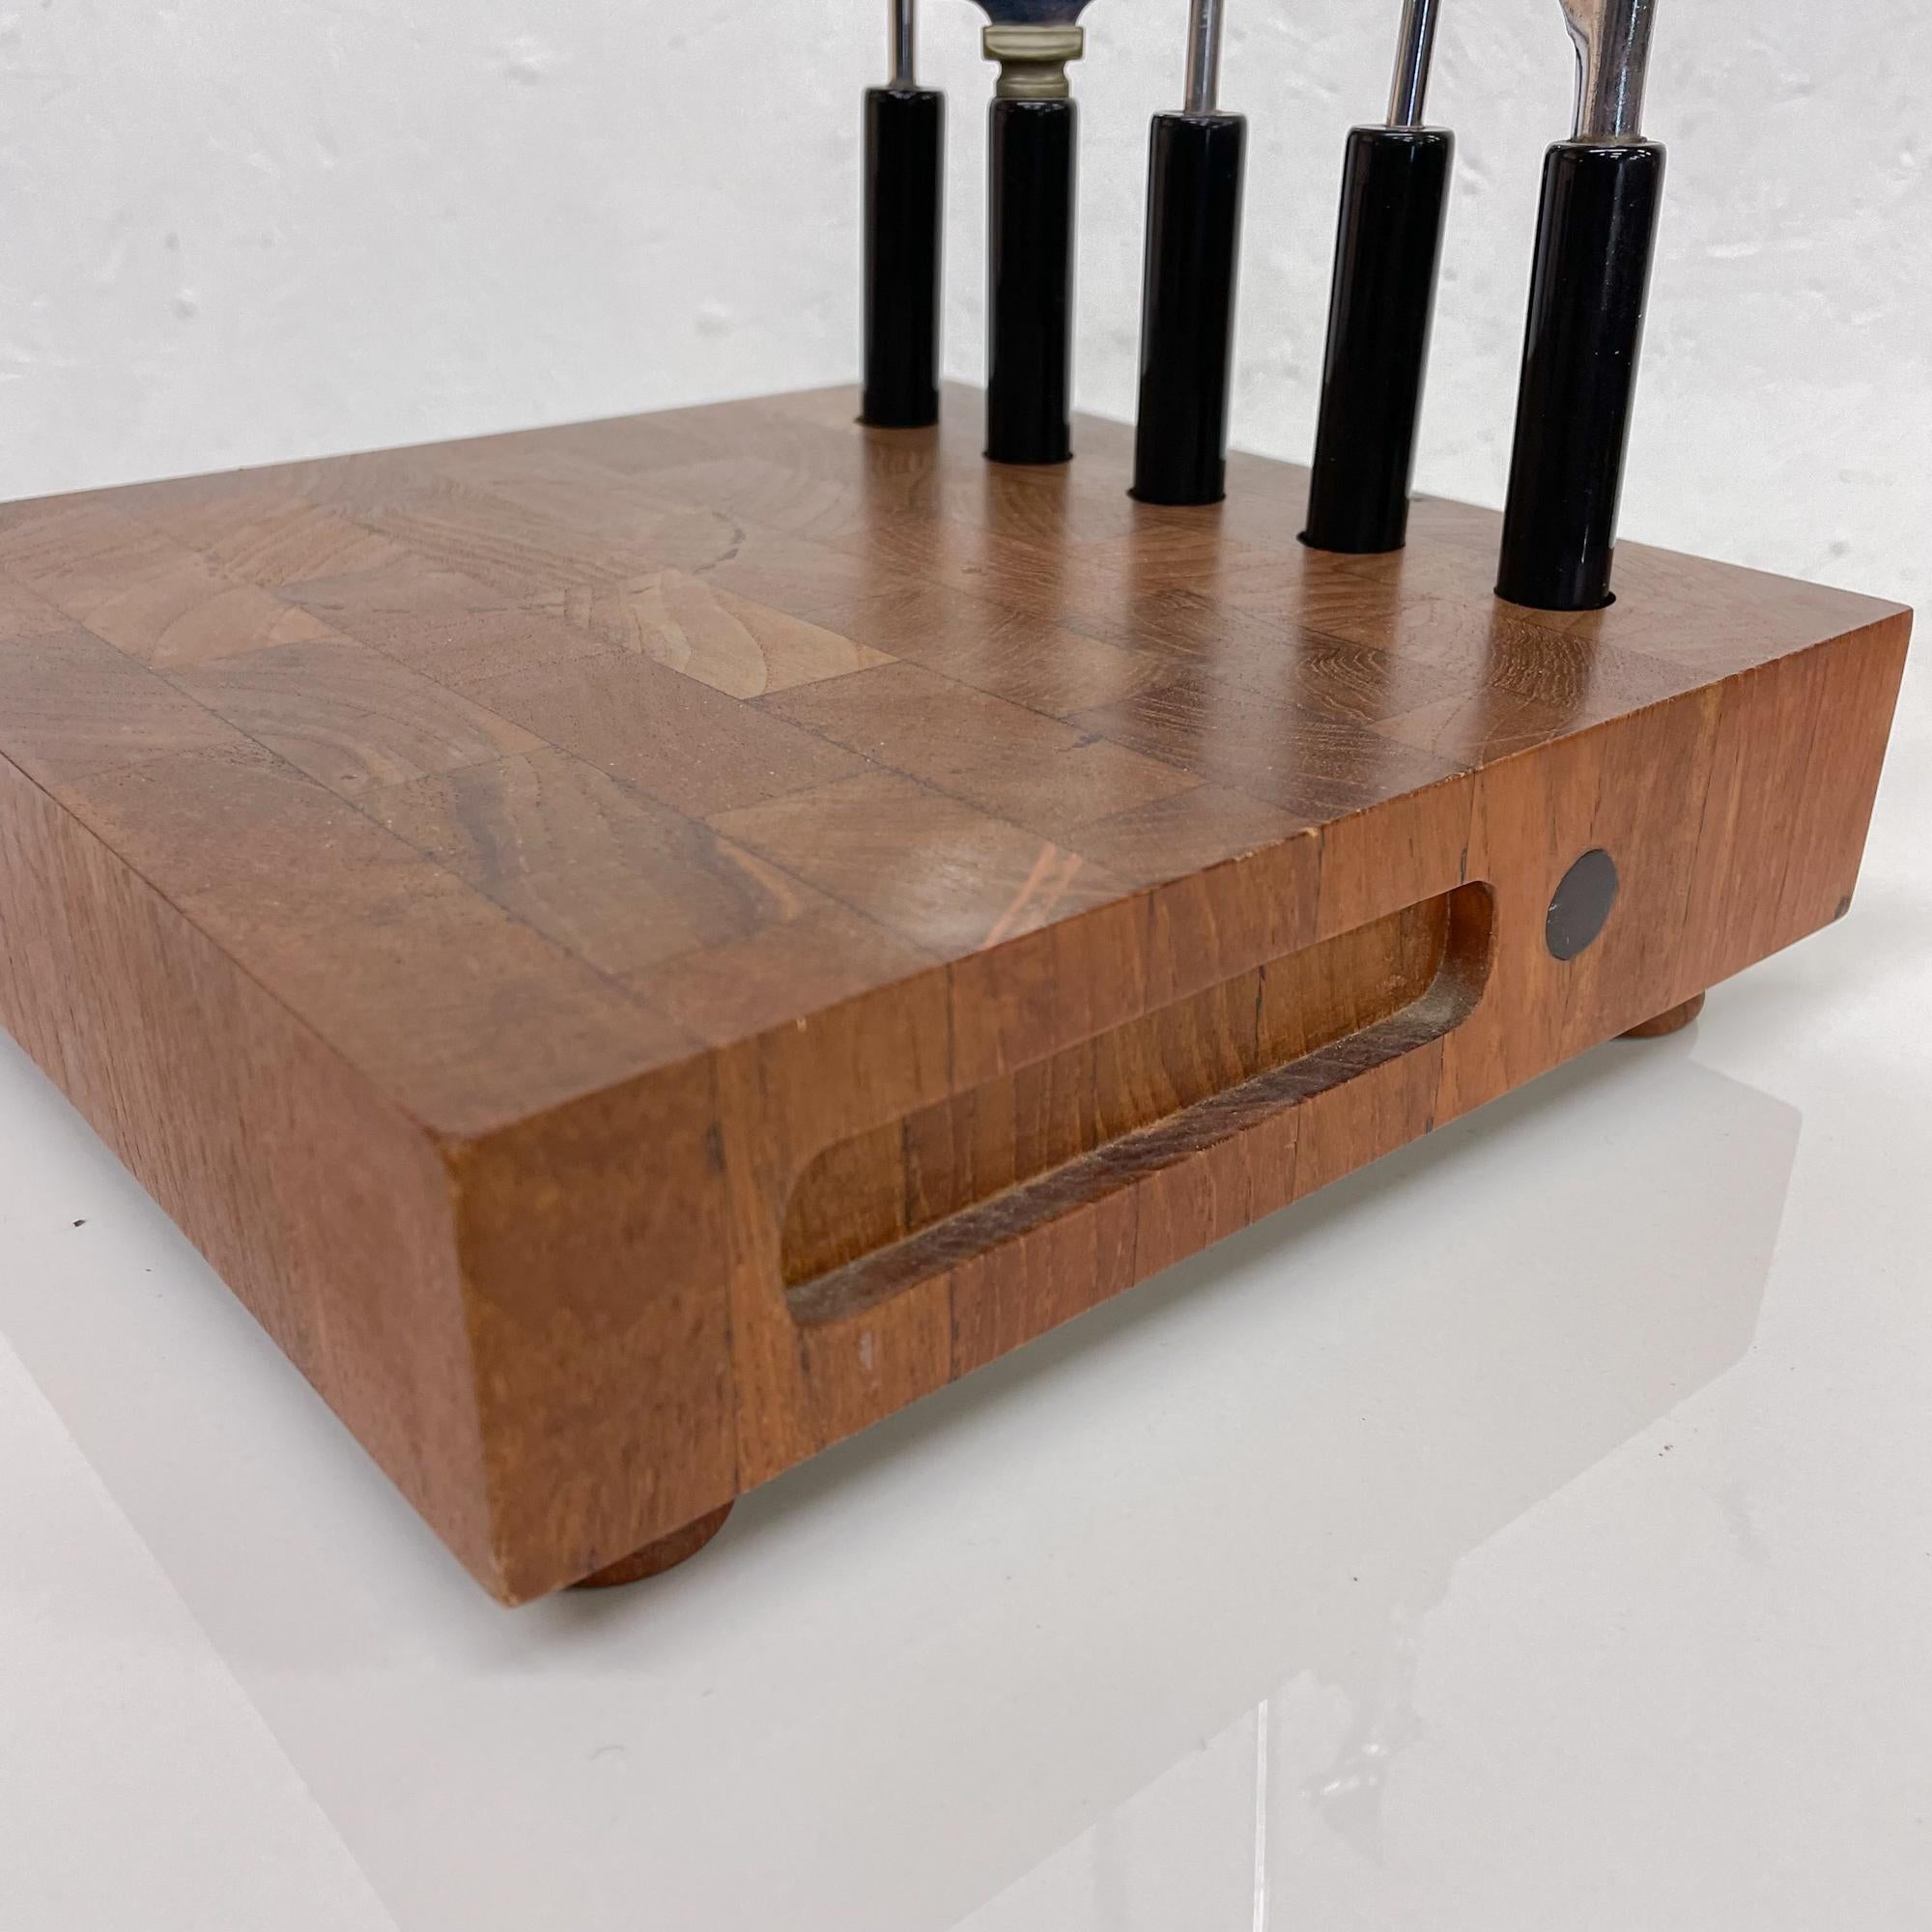  Modernist Handcrafted Teak Cocktail Bar Tool Set 1960s Hong Kong by Atapco  3